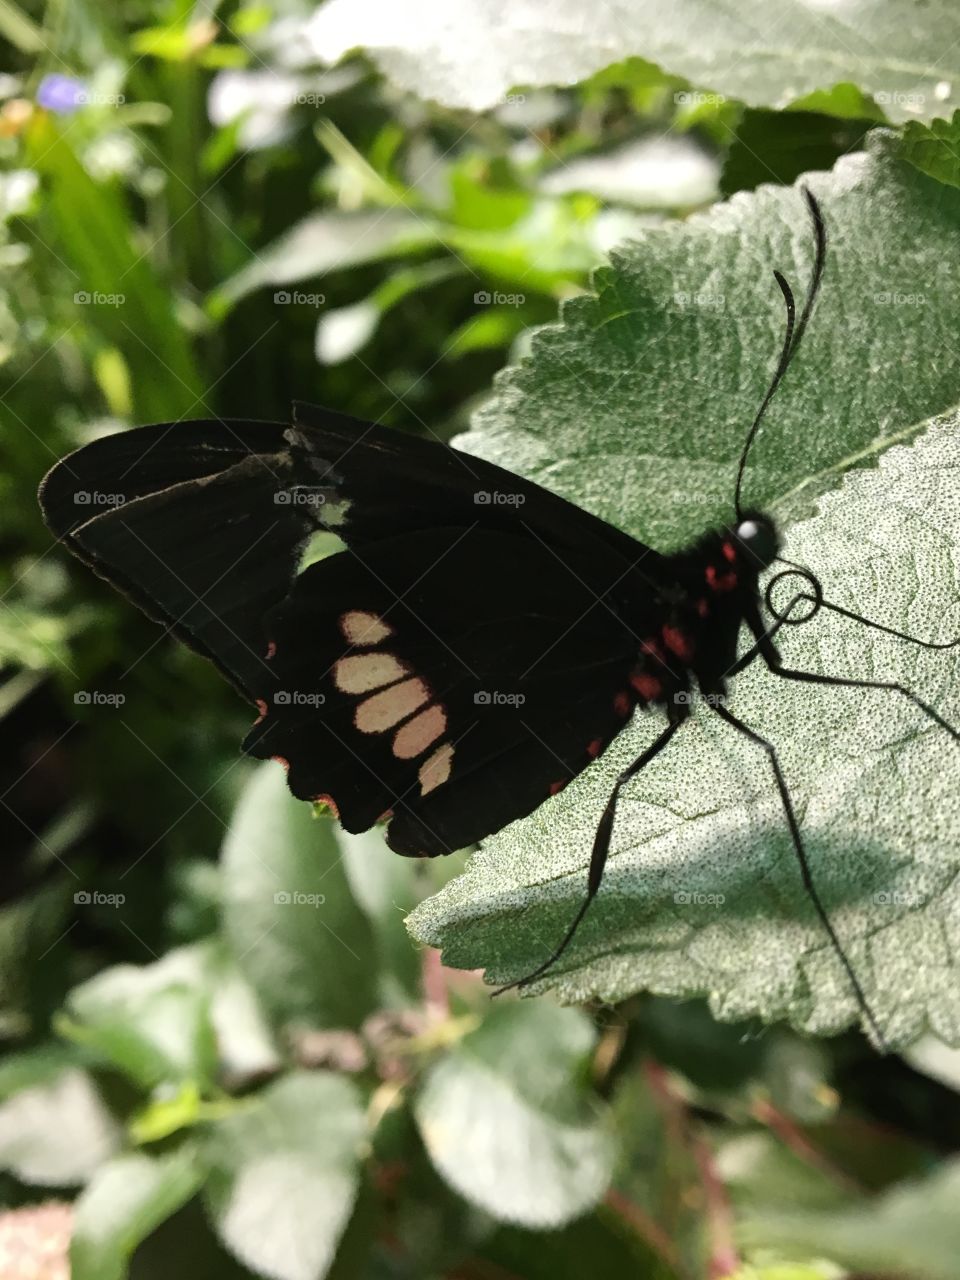 A black butterfly with pale red spots resting on a green leaf